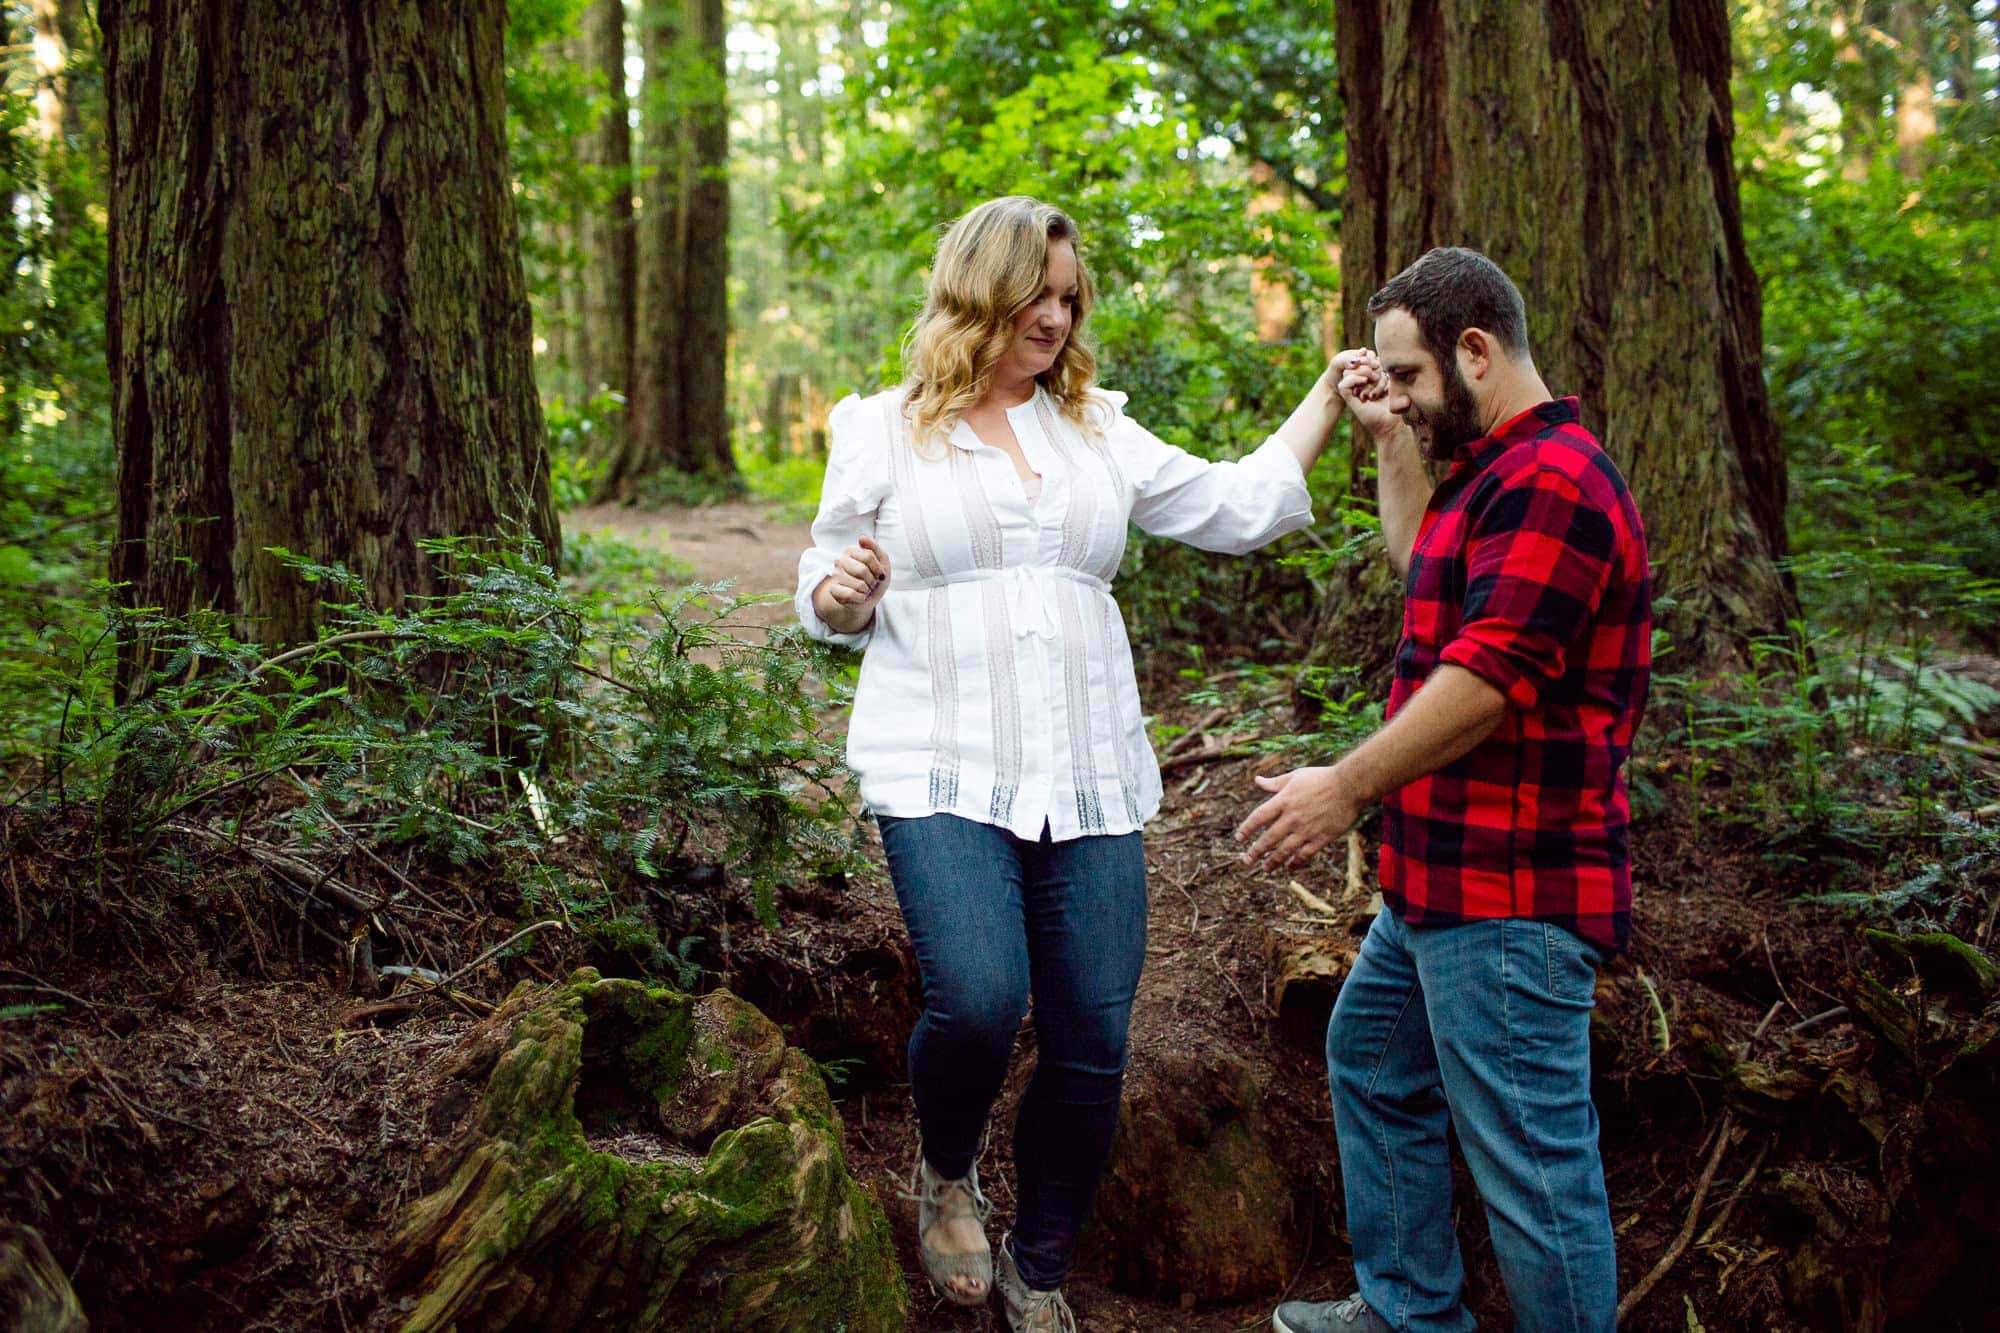 Man helping woman down a path in the redwood forest